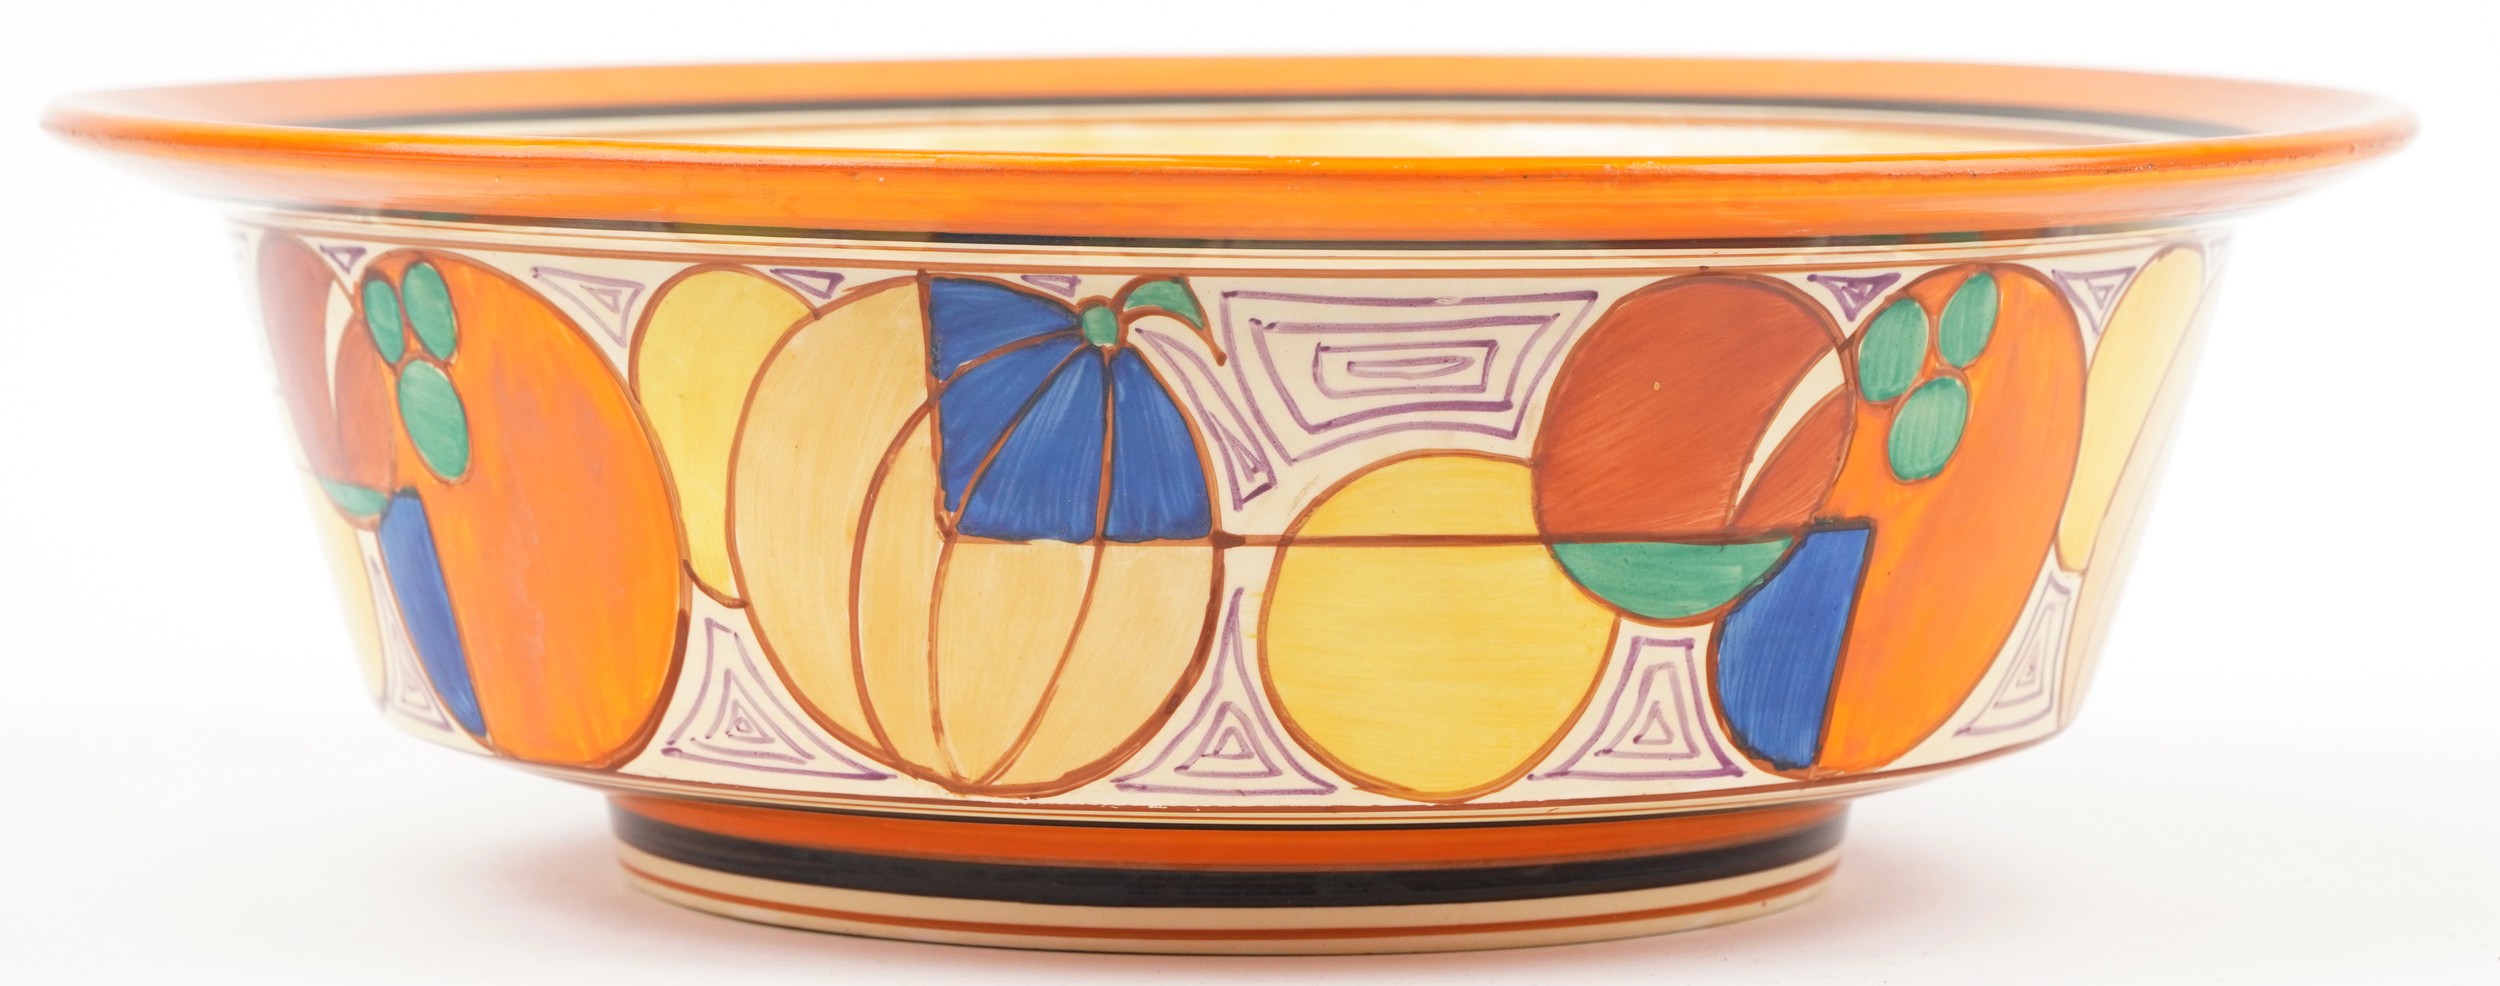 Clarice Cliff, large Art Deco Fantastique Bizarre Tolphin wash bowl hand painted in the melon - Image 3 of 7